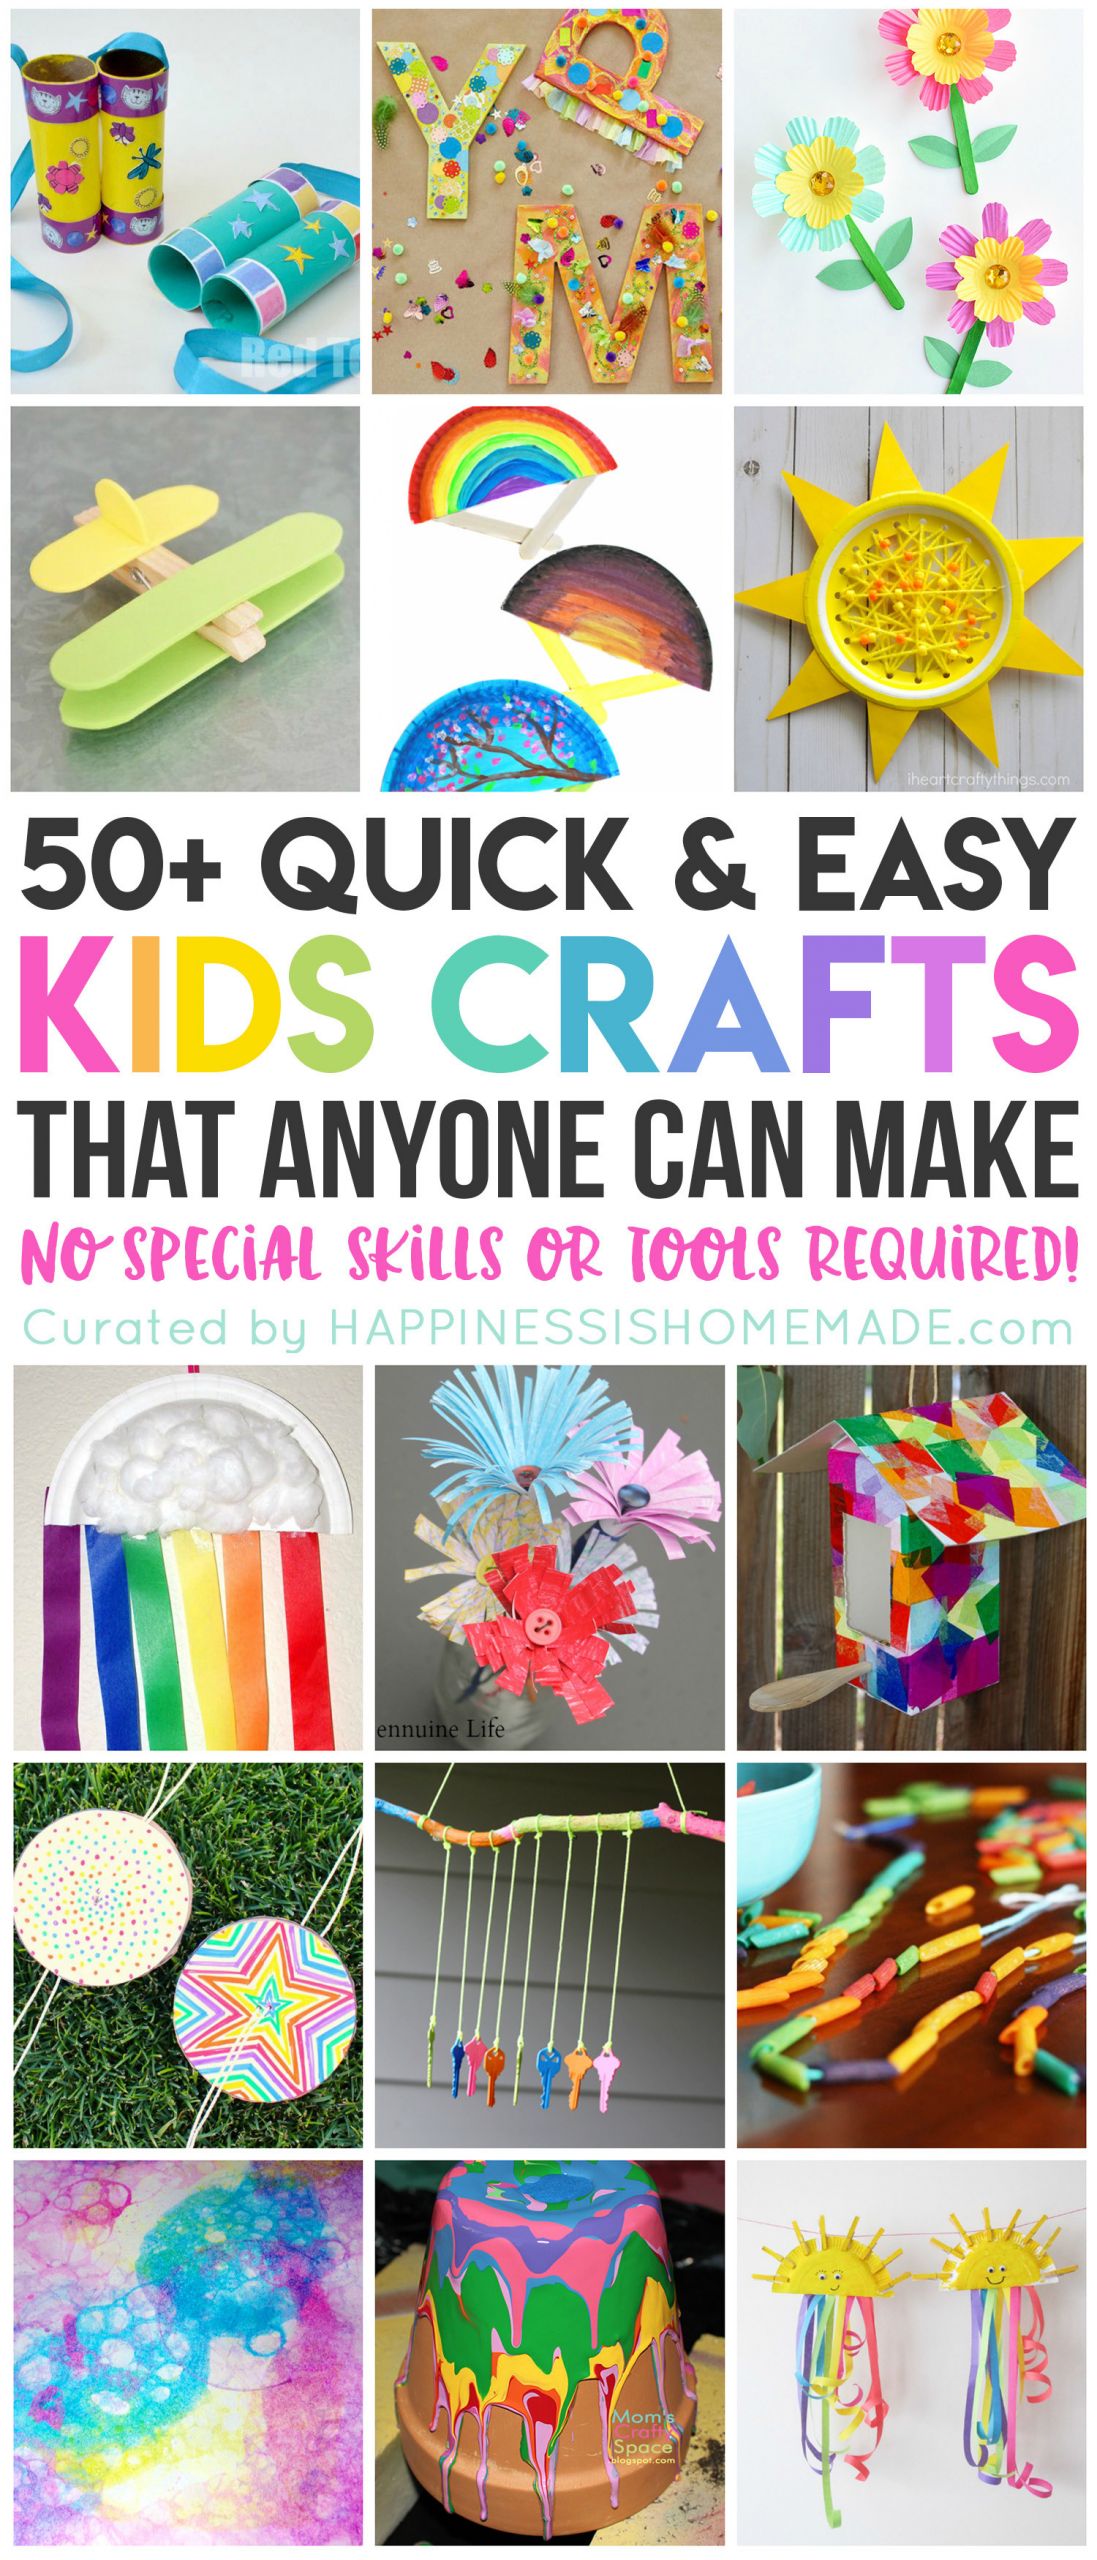 Cute Stuff For Kids
 50 Quick & Easy Kids Crafts that ANYONE Can Make